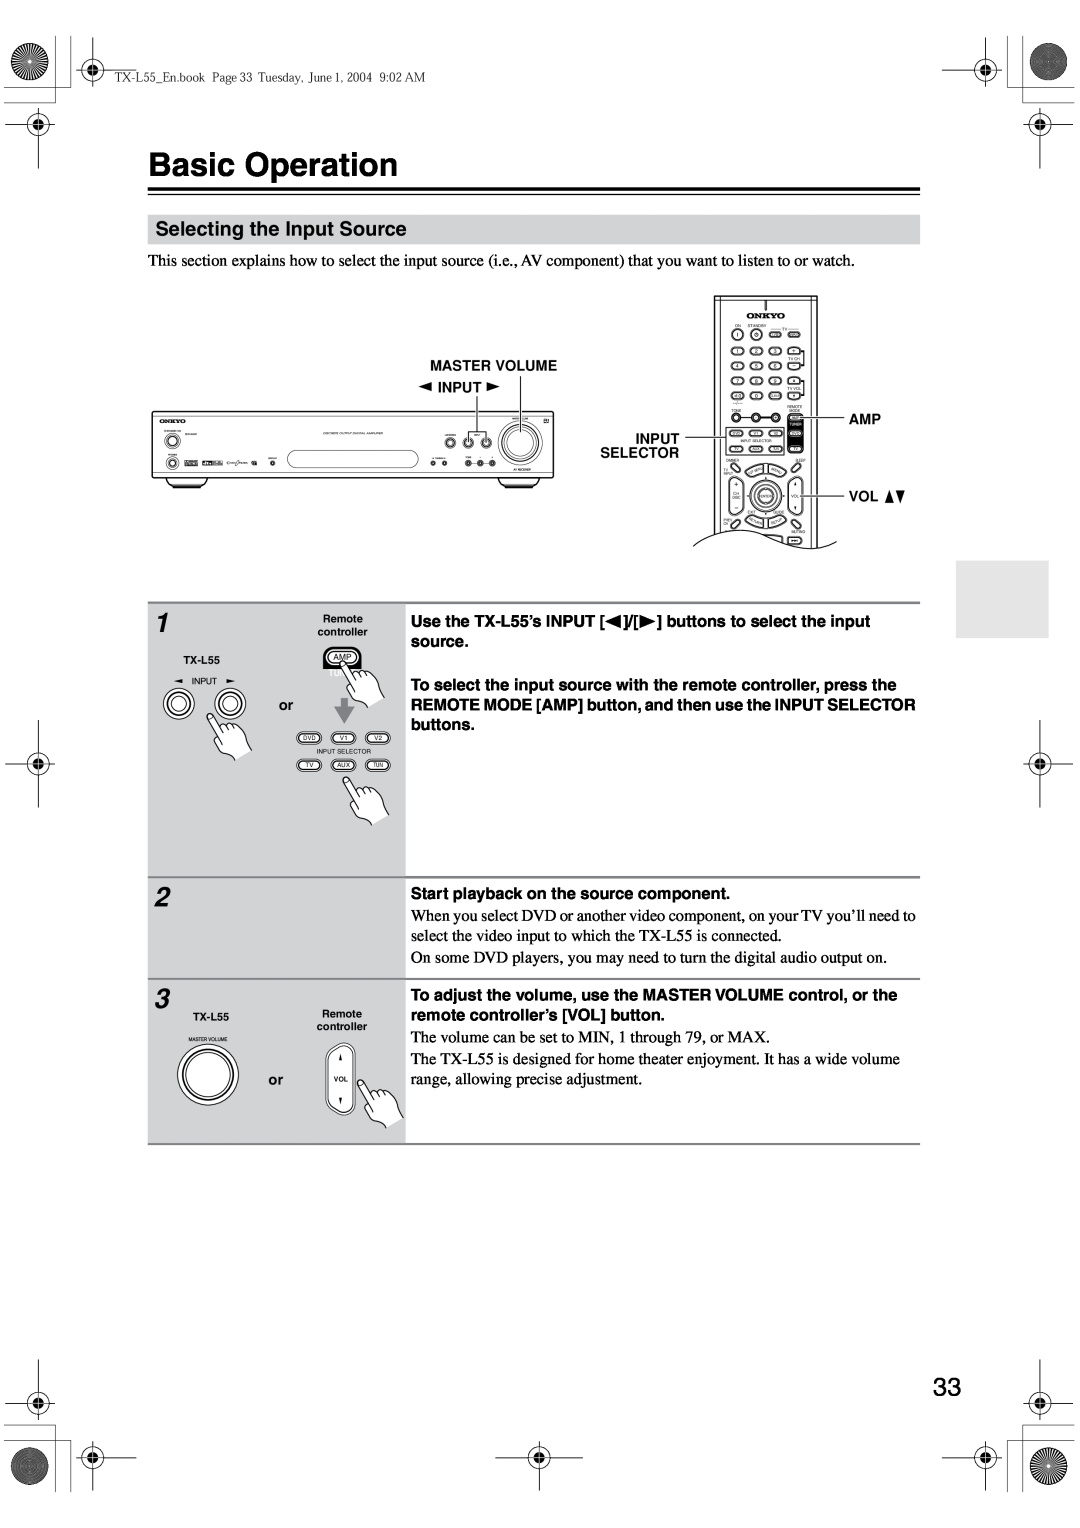 Onkyo TX-L55 instruction manual Basic Operation, Selecting the Input Source 